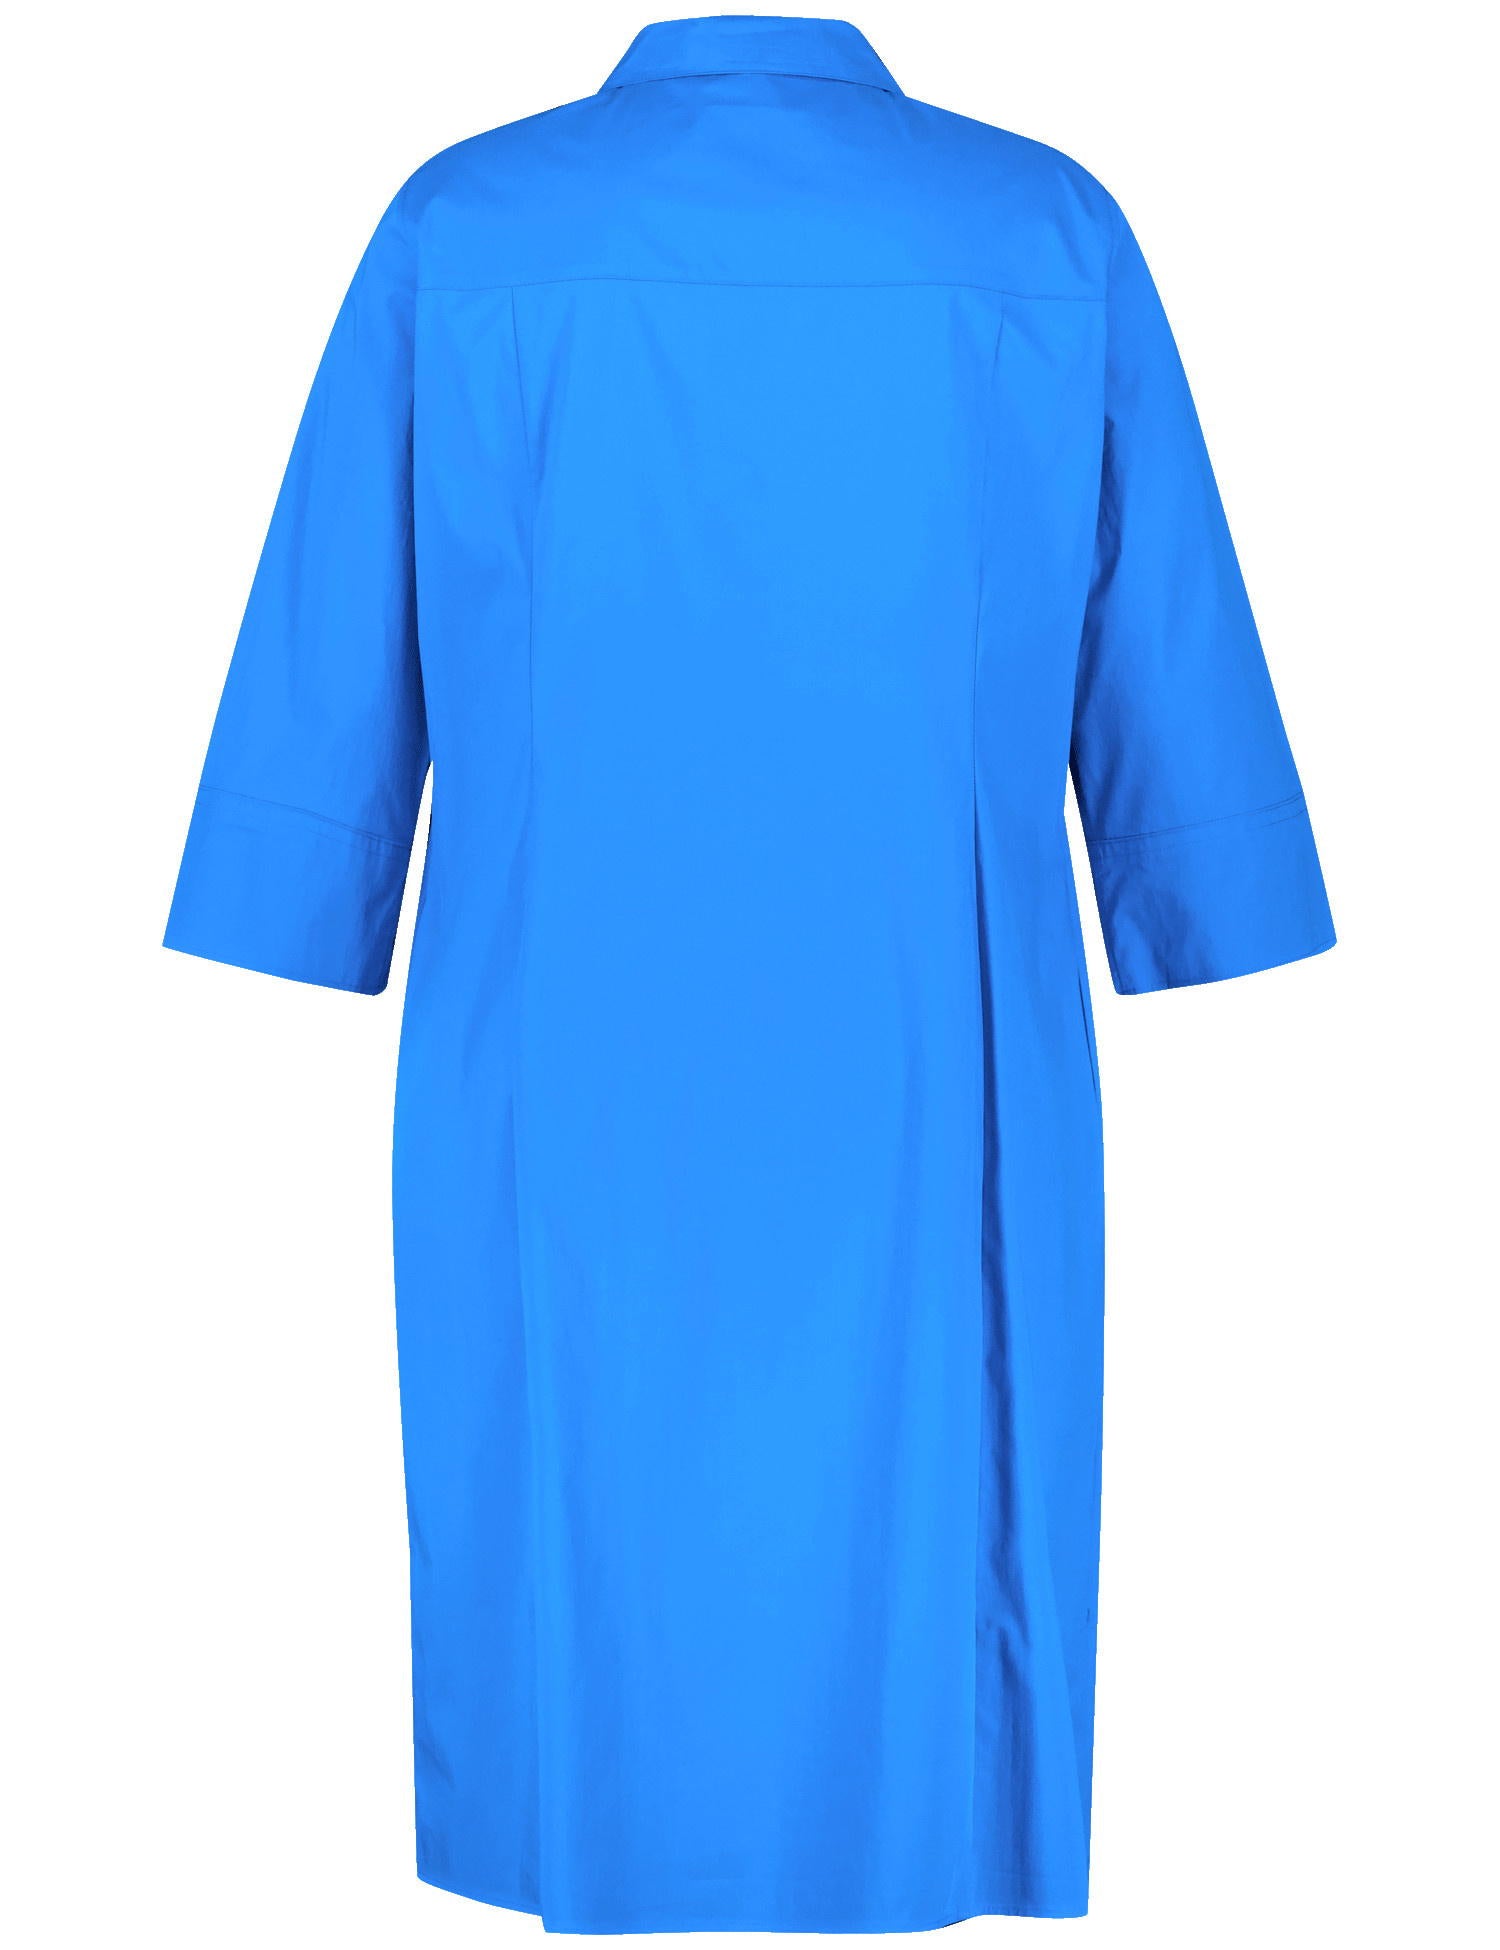 Blouse Dress With 3/4-Length Sleeves And Pockets_480008-21011_8840_03